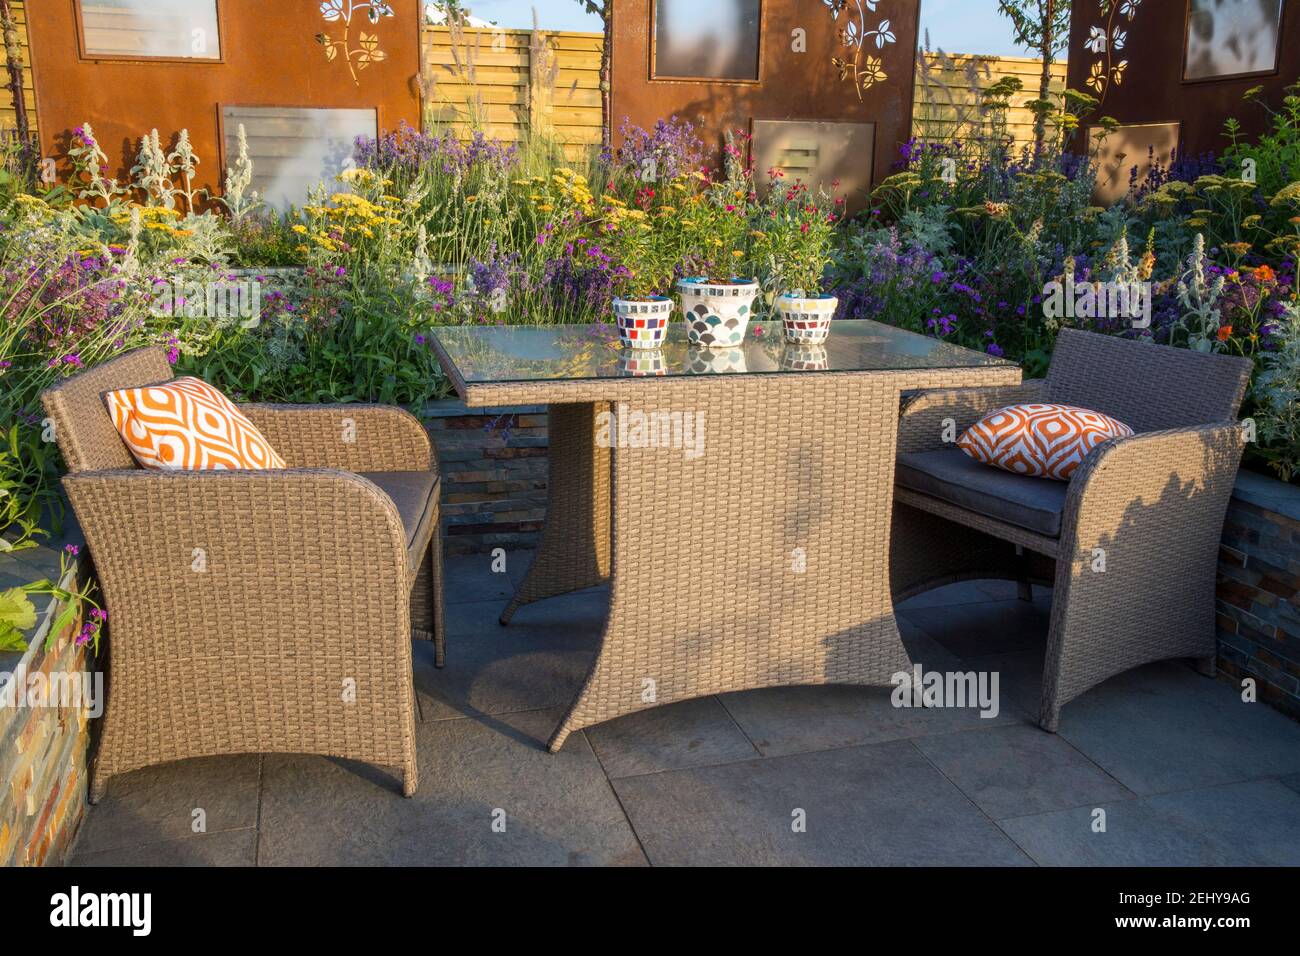 Modern garden design patio with acrylic rattan dining furniture with outdoor garden furniture table and chairs, orange cushions, raised beds UK Stock Photo